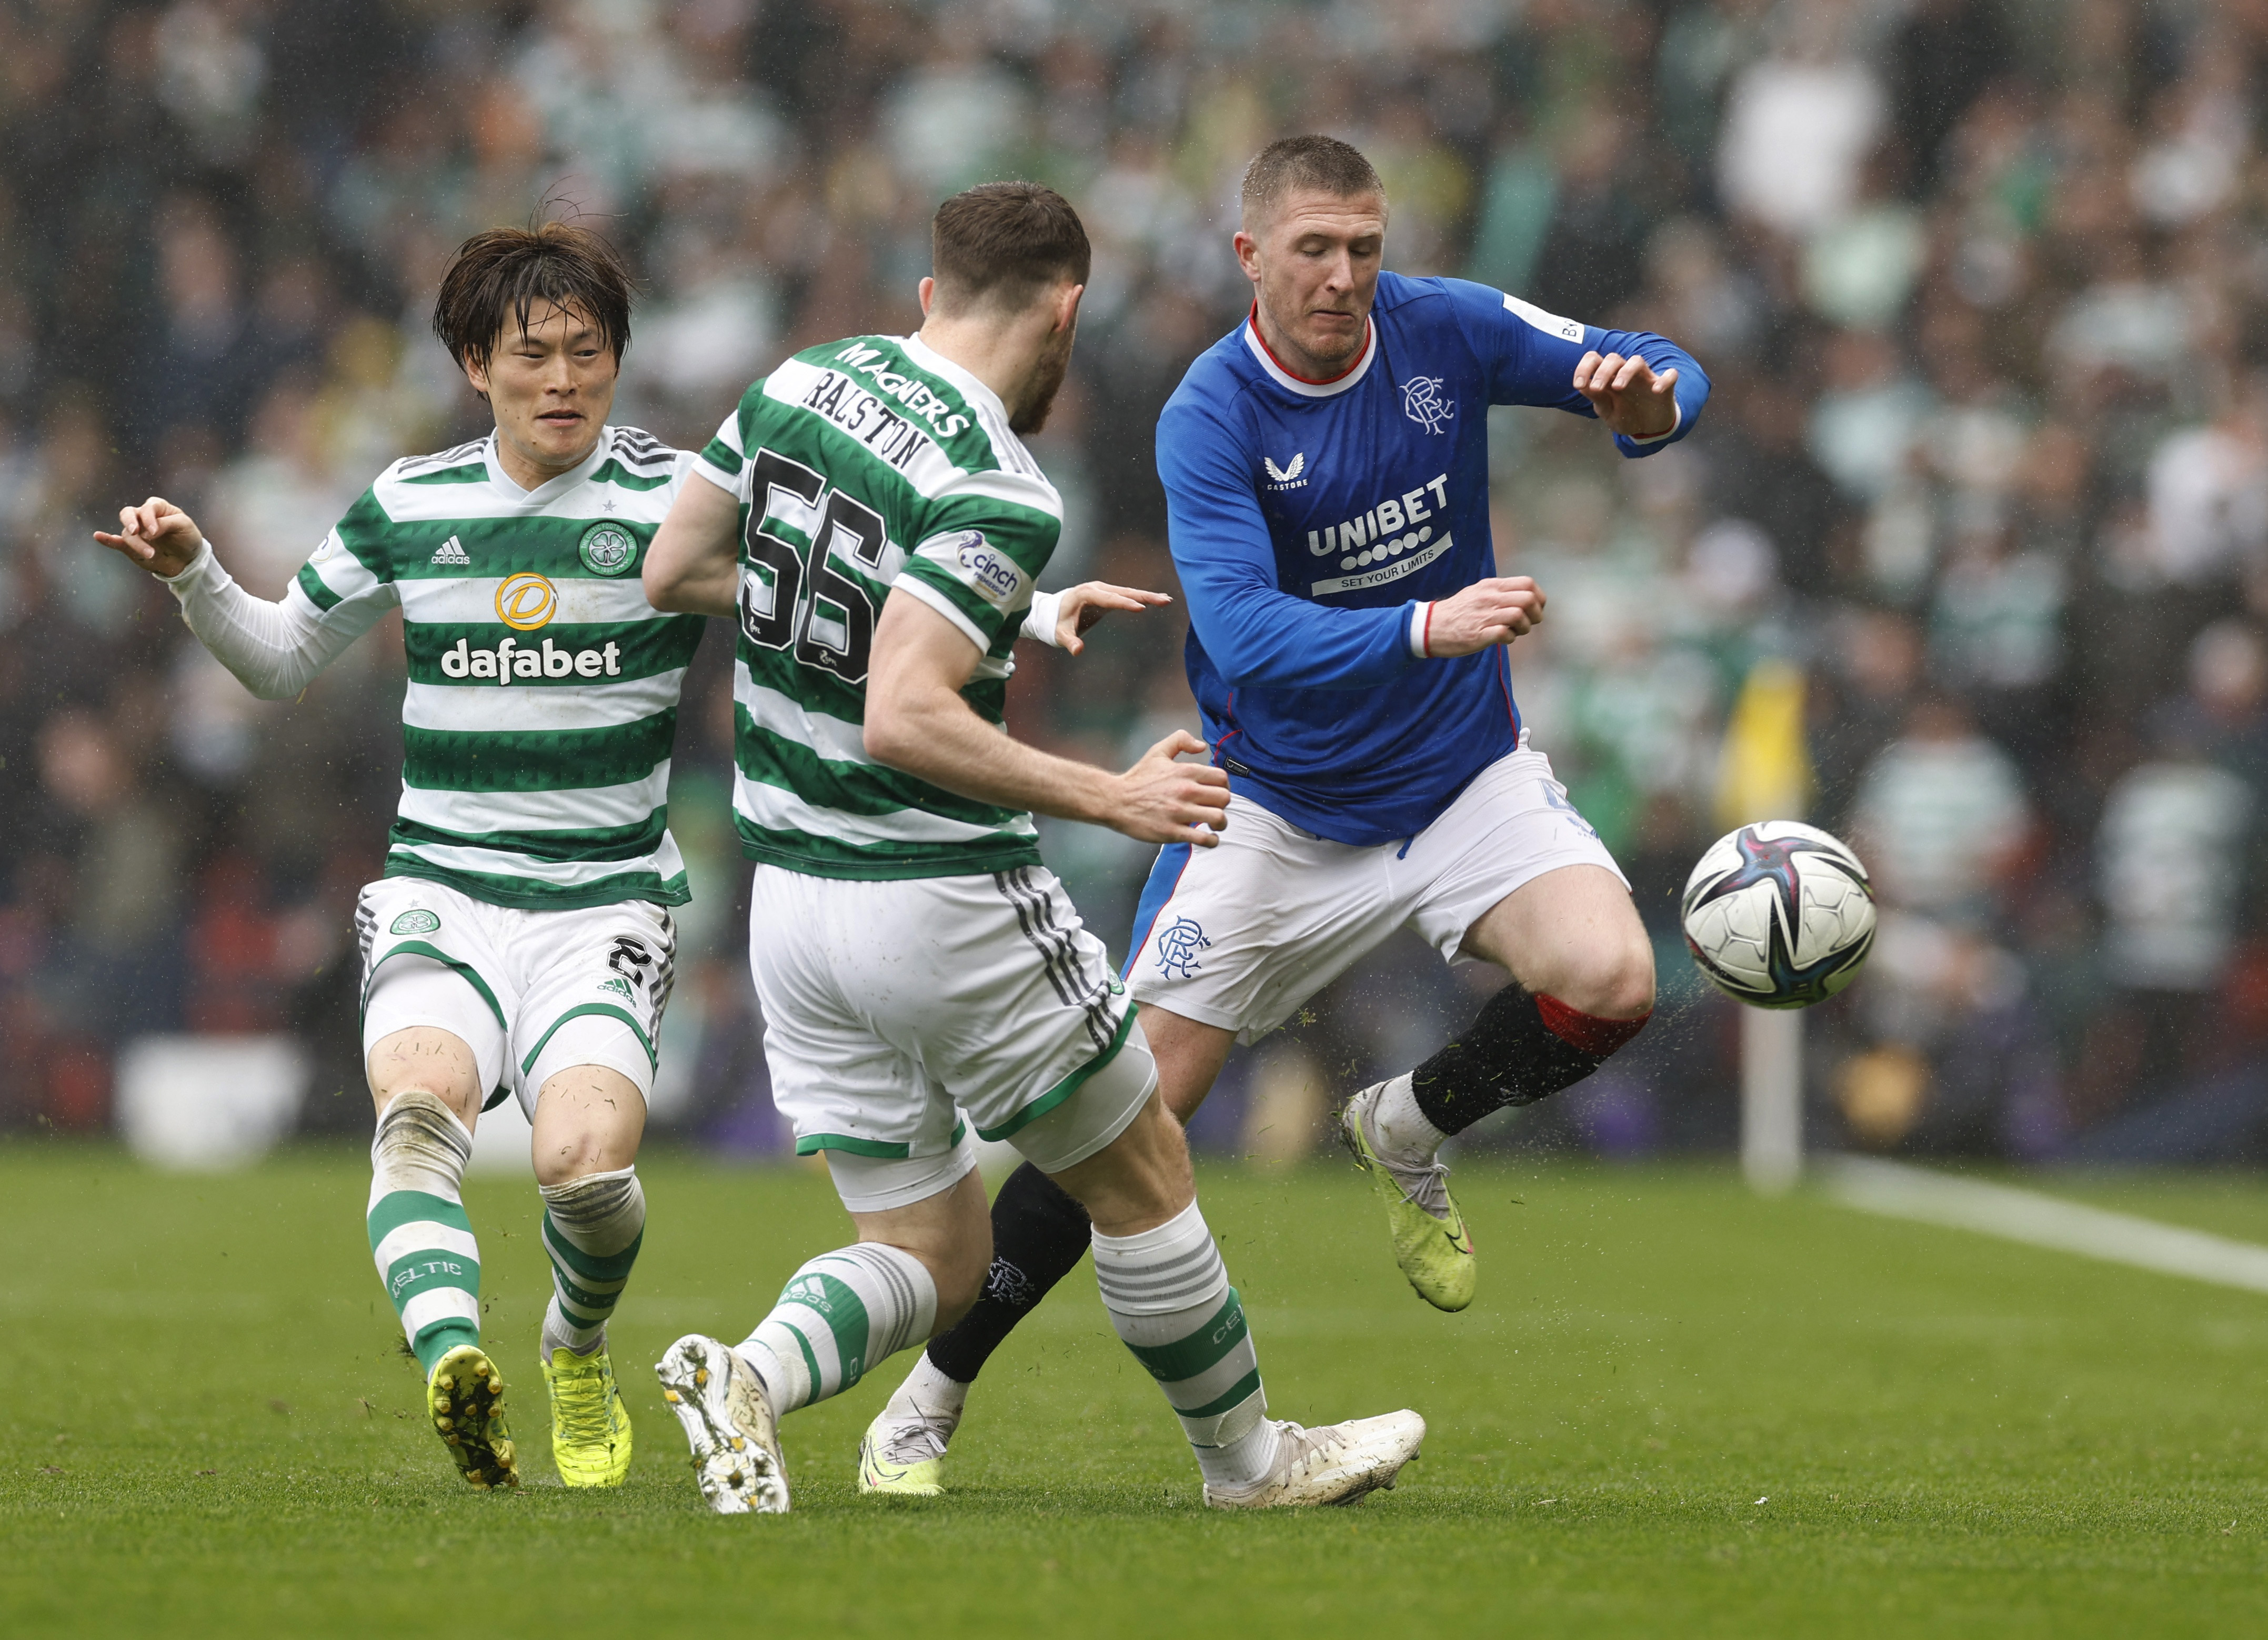 Celtic edge Rangers to reach Scottish Cup final